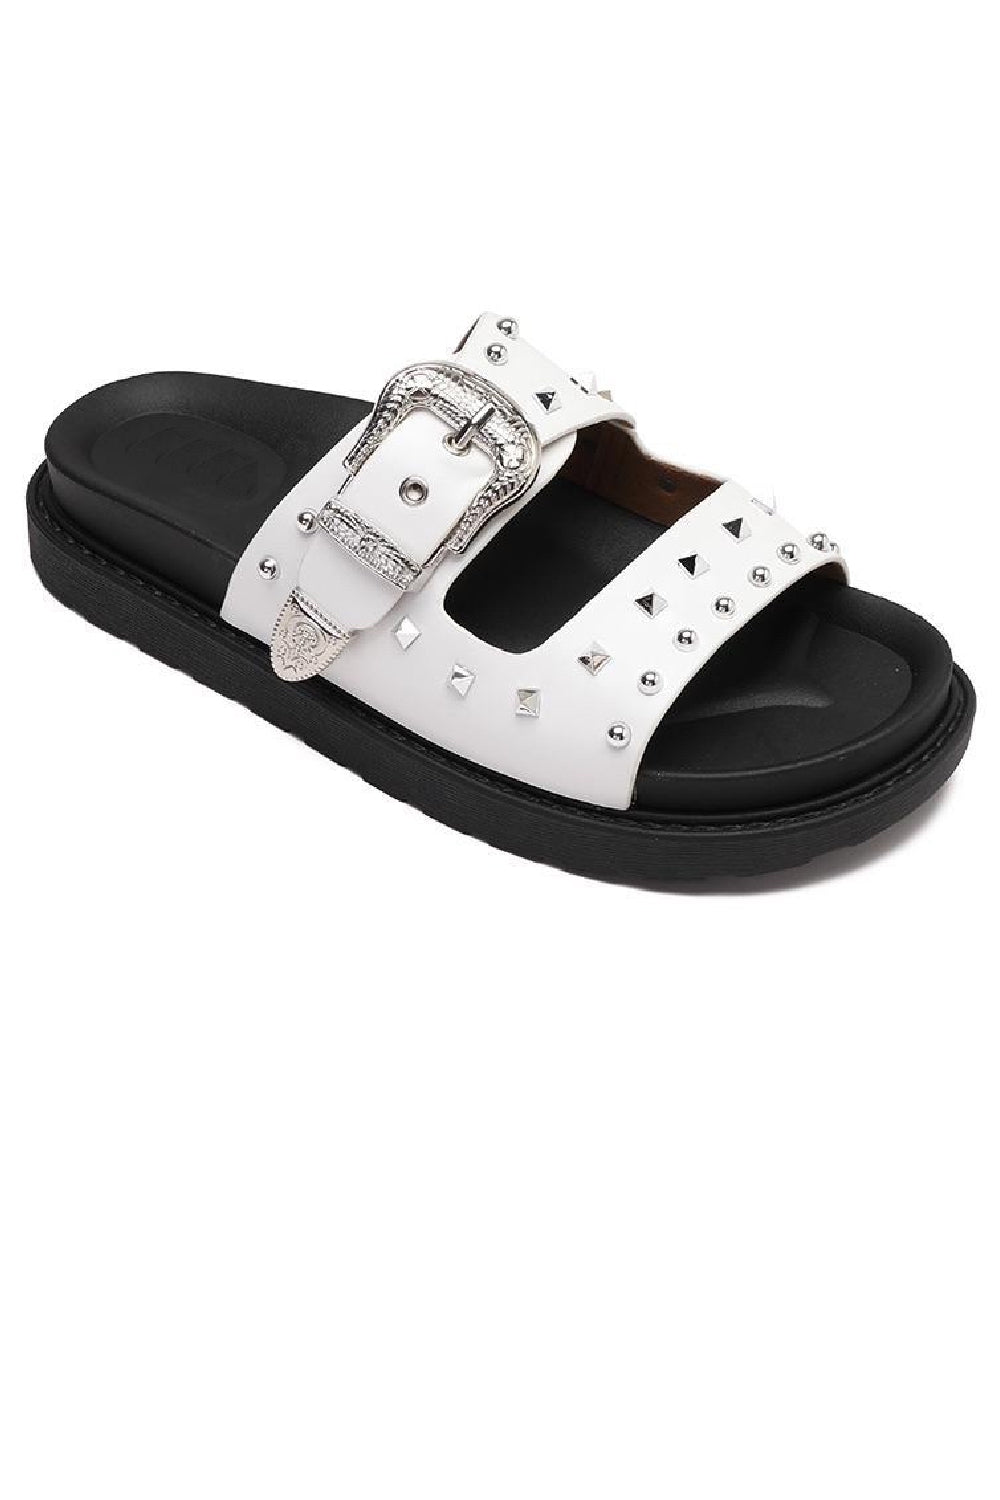 WHITE WESTERN BUCKLE STUDDED SLIDERS FLAT SANDALS